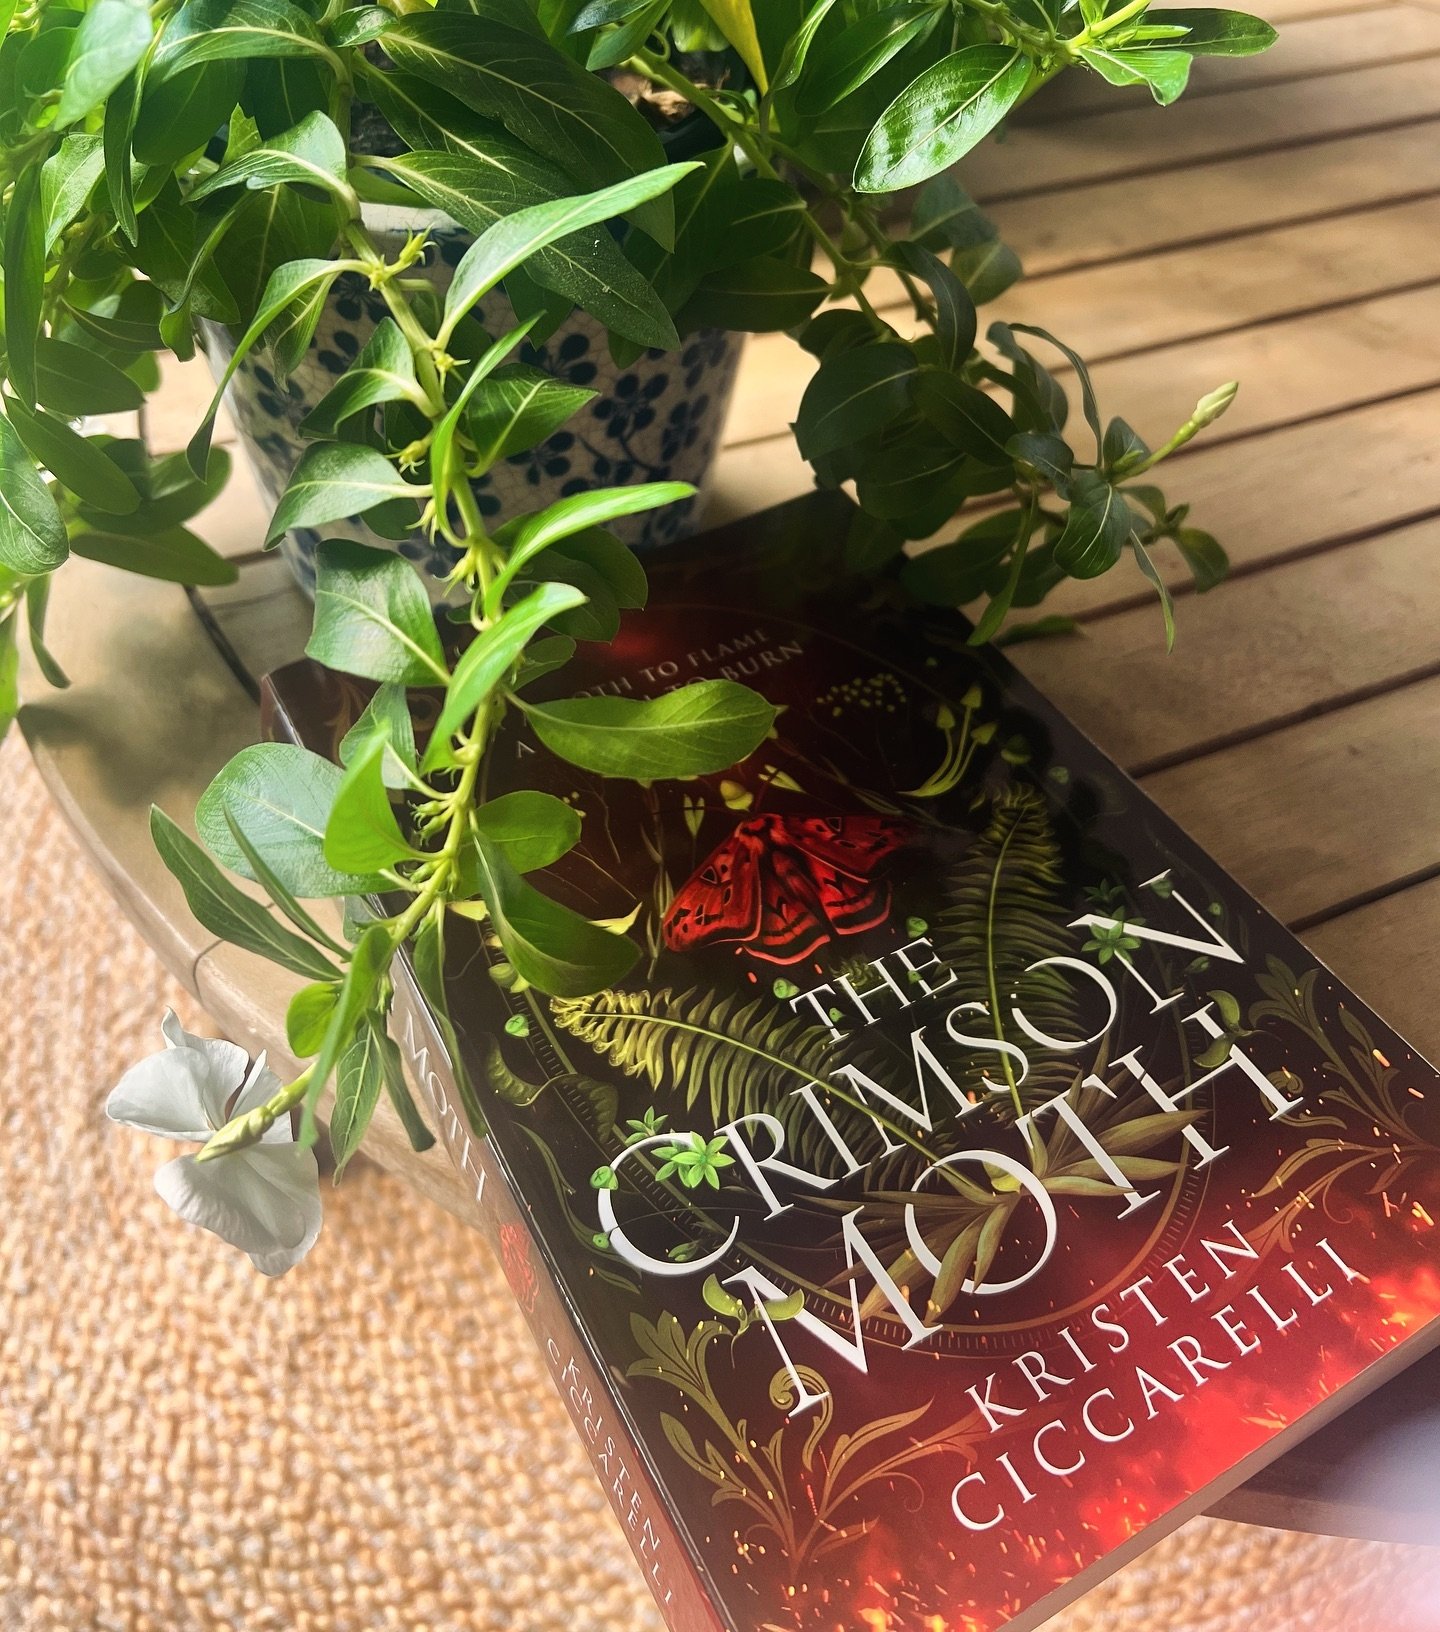 The Crimson Moth by Kristen Ciccarelli was highly recommended to me by @maggie_formella_leigh so I can&rsquo;t wait to get into it this weekend! Romantasy and enemies to lovers 👌

What are you reading this weekend?